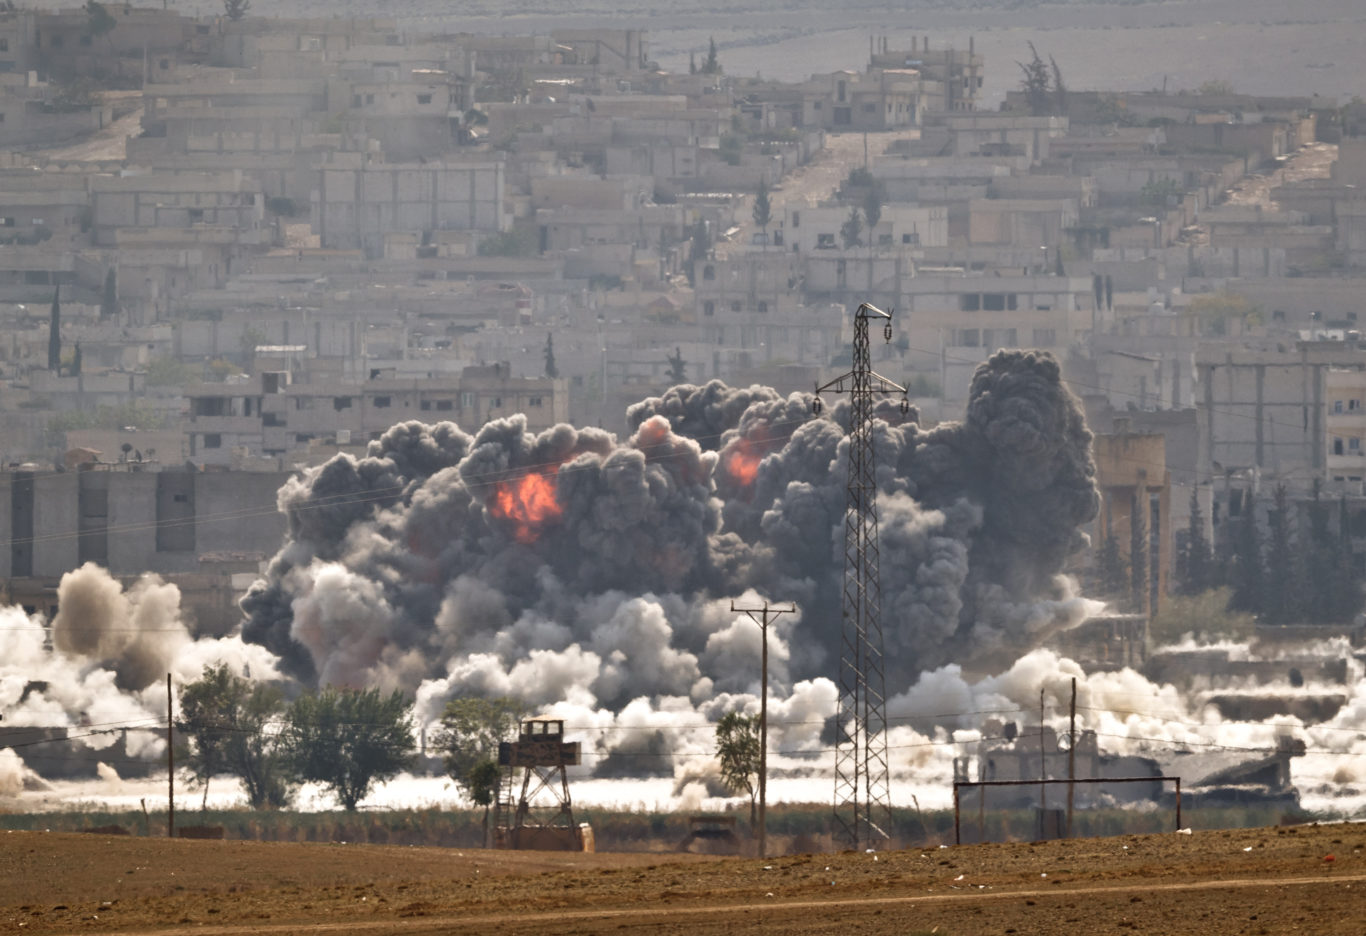 An Islamic State fighters' position in the town of Kobani during airstrikes by the US-led coalition (Vadim Ghirda/AP)